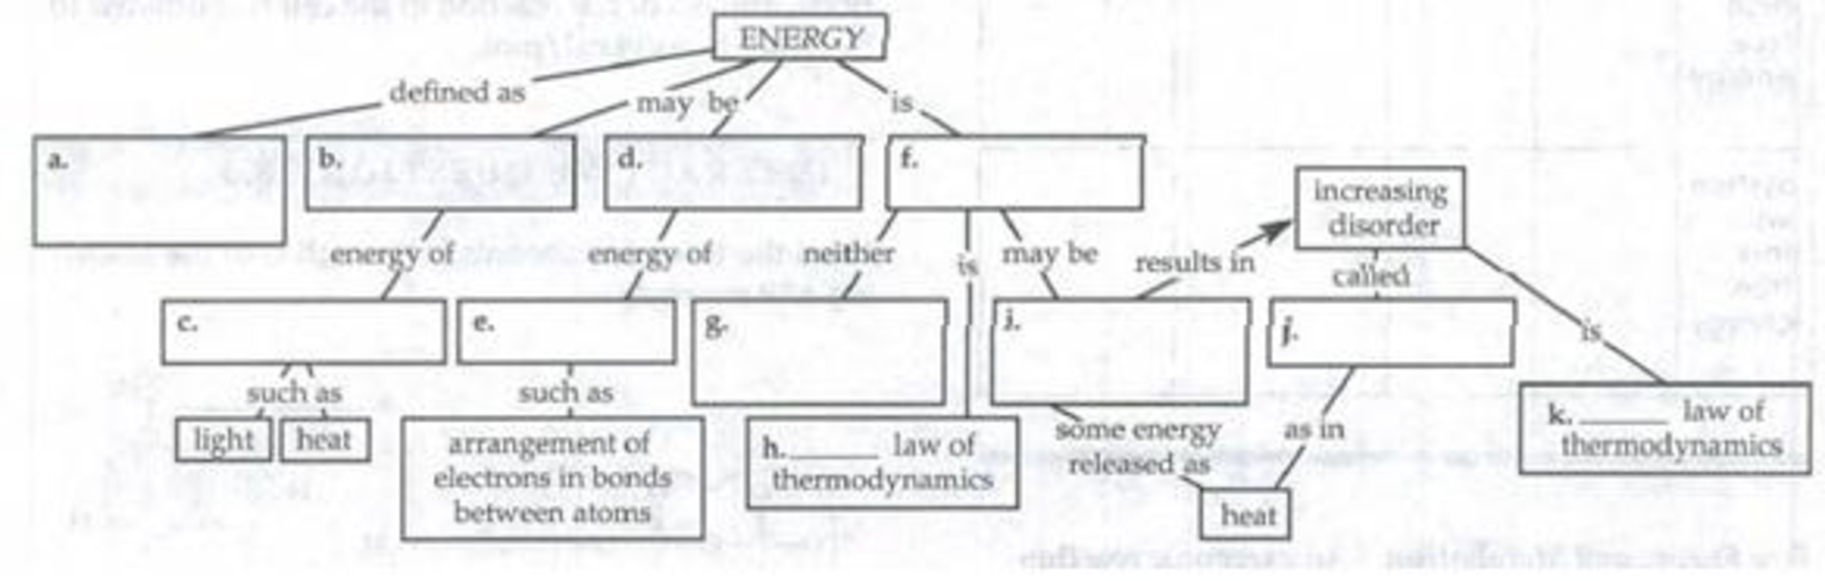 Chapter 8, Problem 1IQ, Complete the following concept map that summarizes some of the key ideas about energy. 